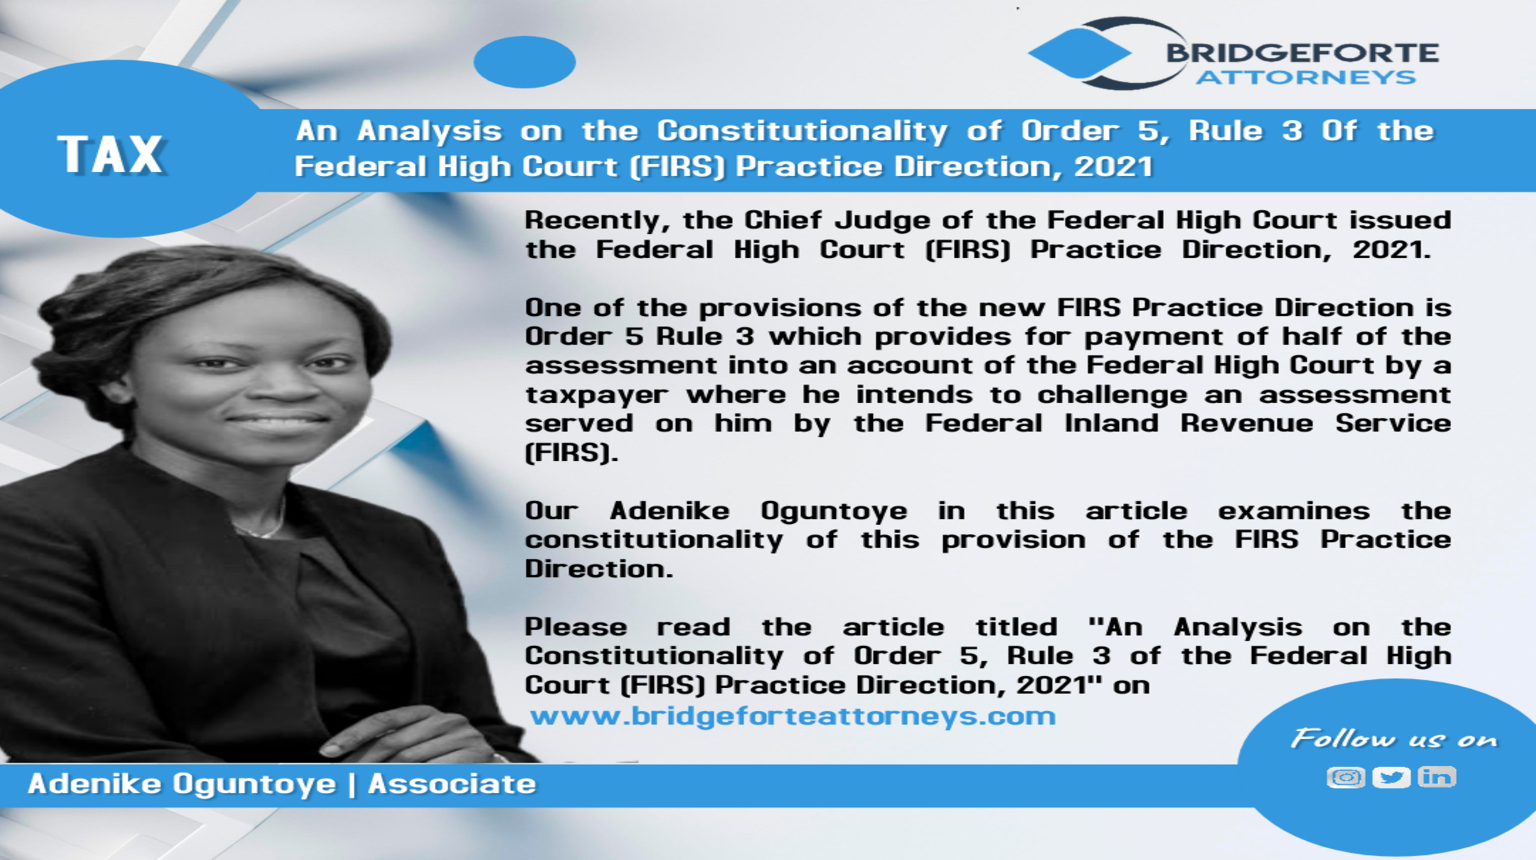 AN ANALYSIS ON THE CONSTITUTIONALITY OF ORDER 5, RULE 3 OF THE FEDERAL HIGH COURT (FIRS) PRACTICE DIRECTION, 2021